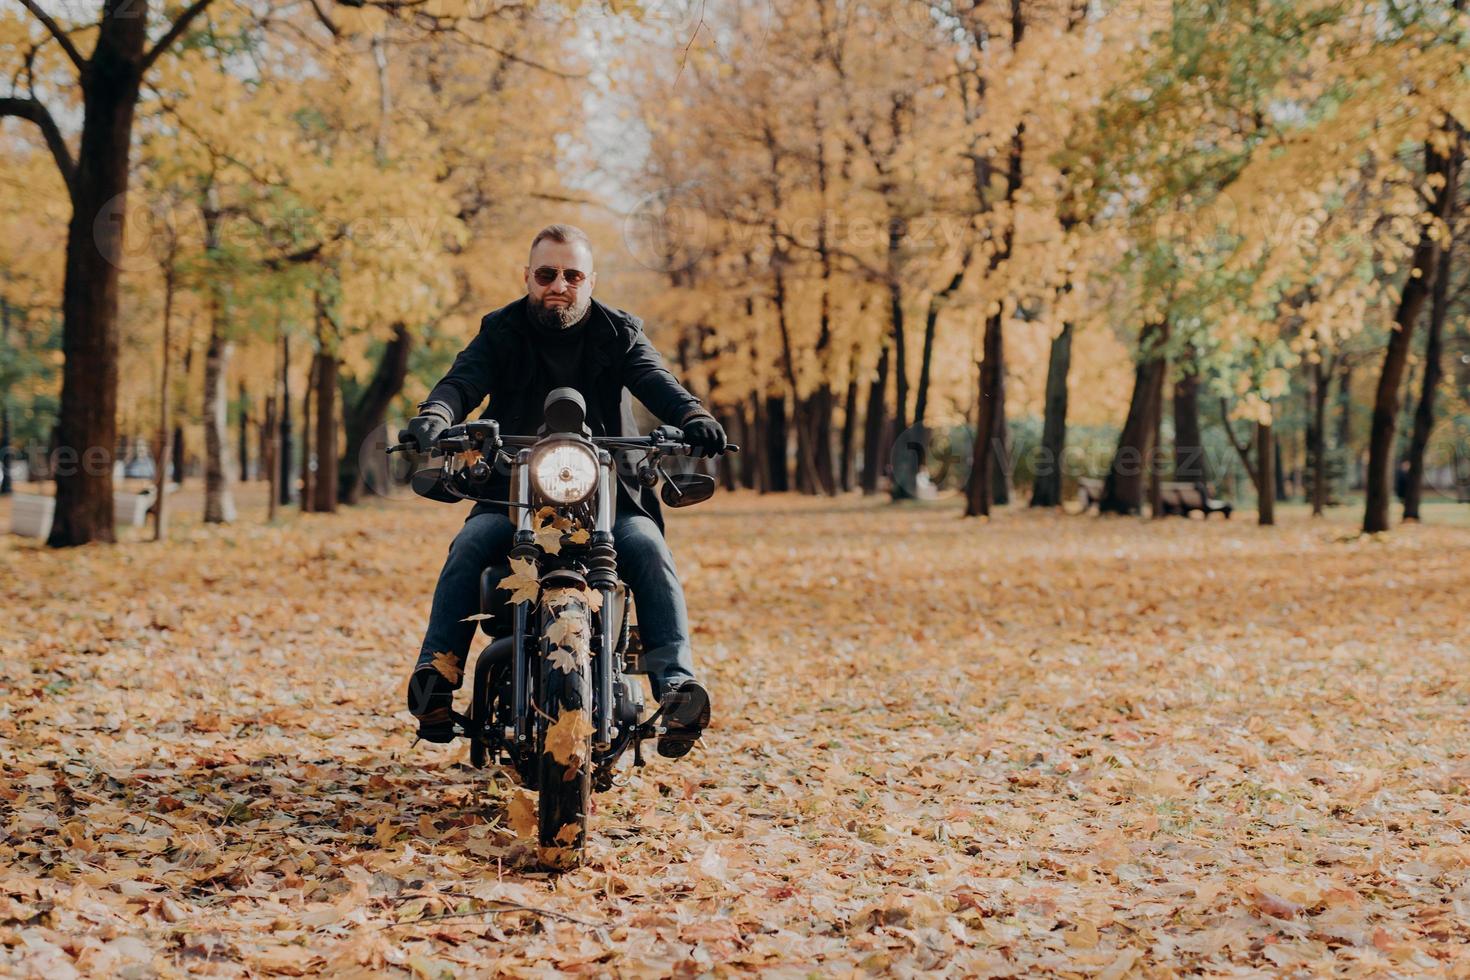 Brutal professional male motorcyclist rides bike, wears sunglasses, gloves and black jacket, has ride through autumnal park, beautiful scenery in background with yellow trees and fallen leaves around photo